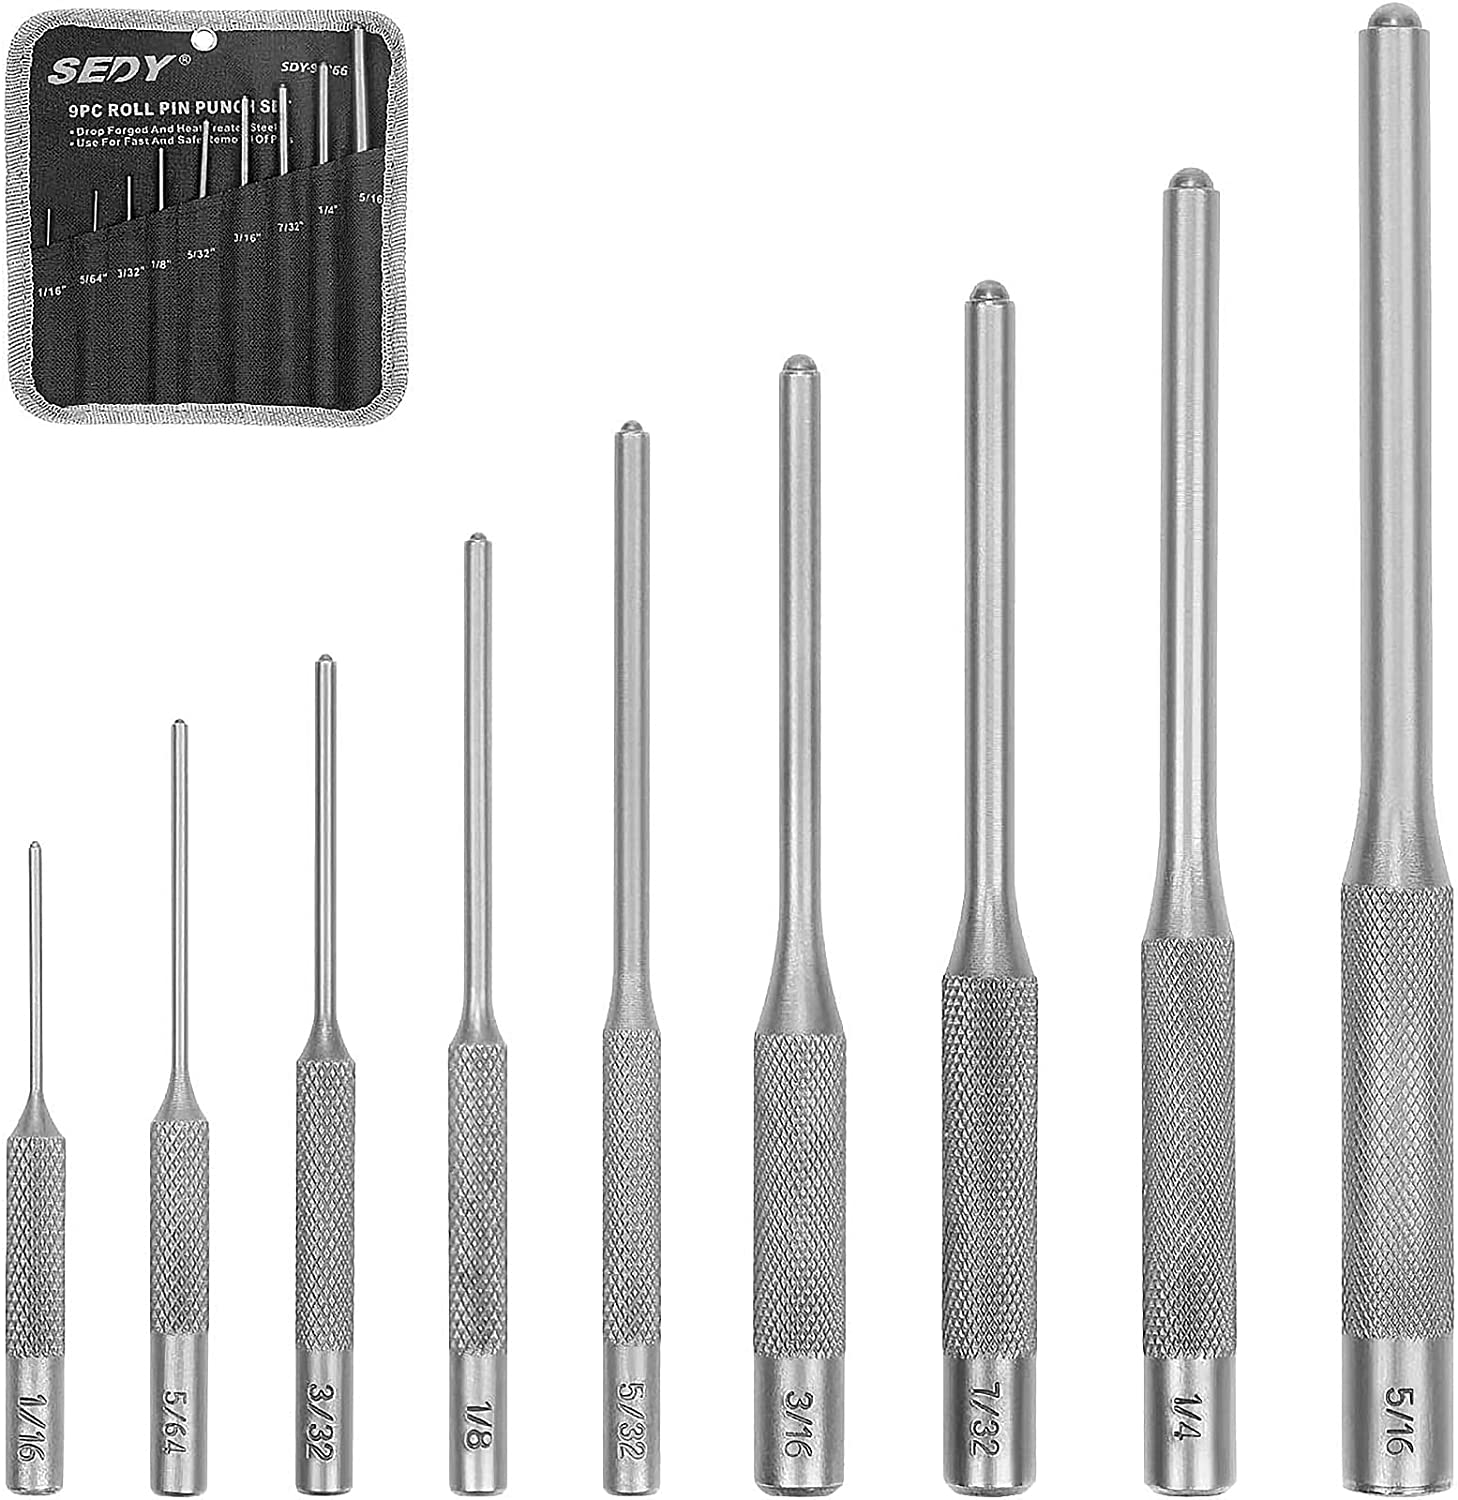 SEDY Multipurpose Ultra Fast Toolbox Punches, 9-Piece